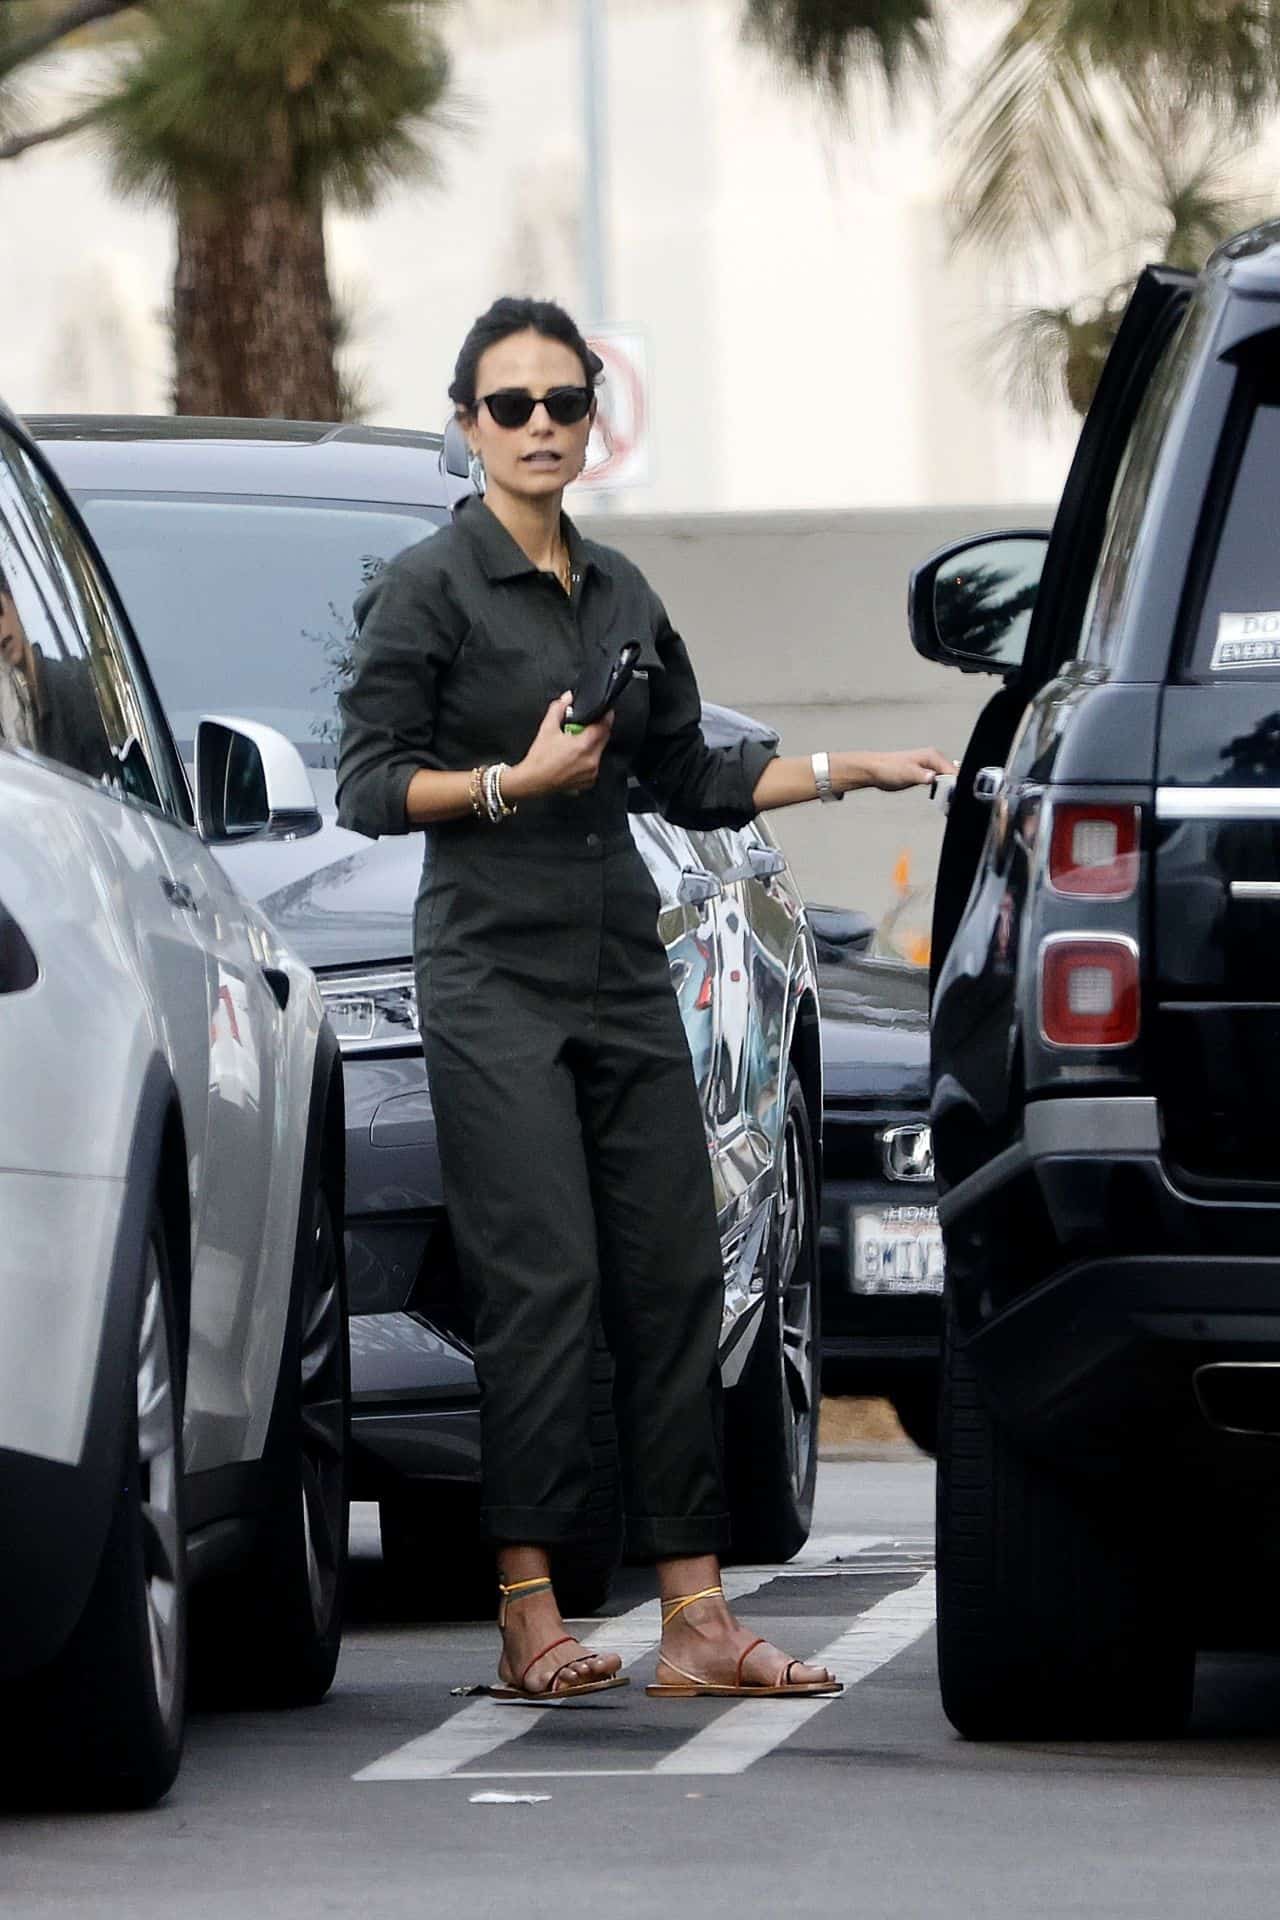 Jordana Brewster Looked Amazing and Chic Once Again in Dark Jumpsuit